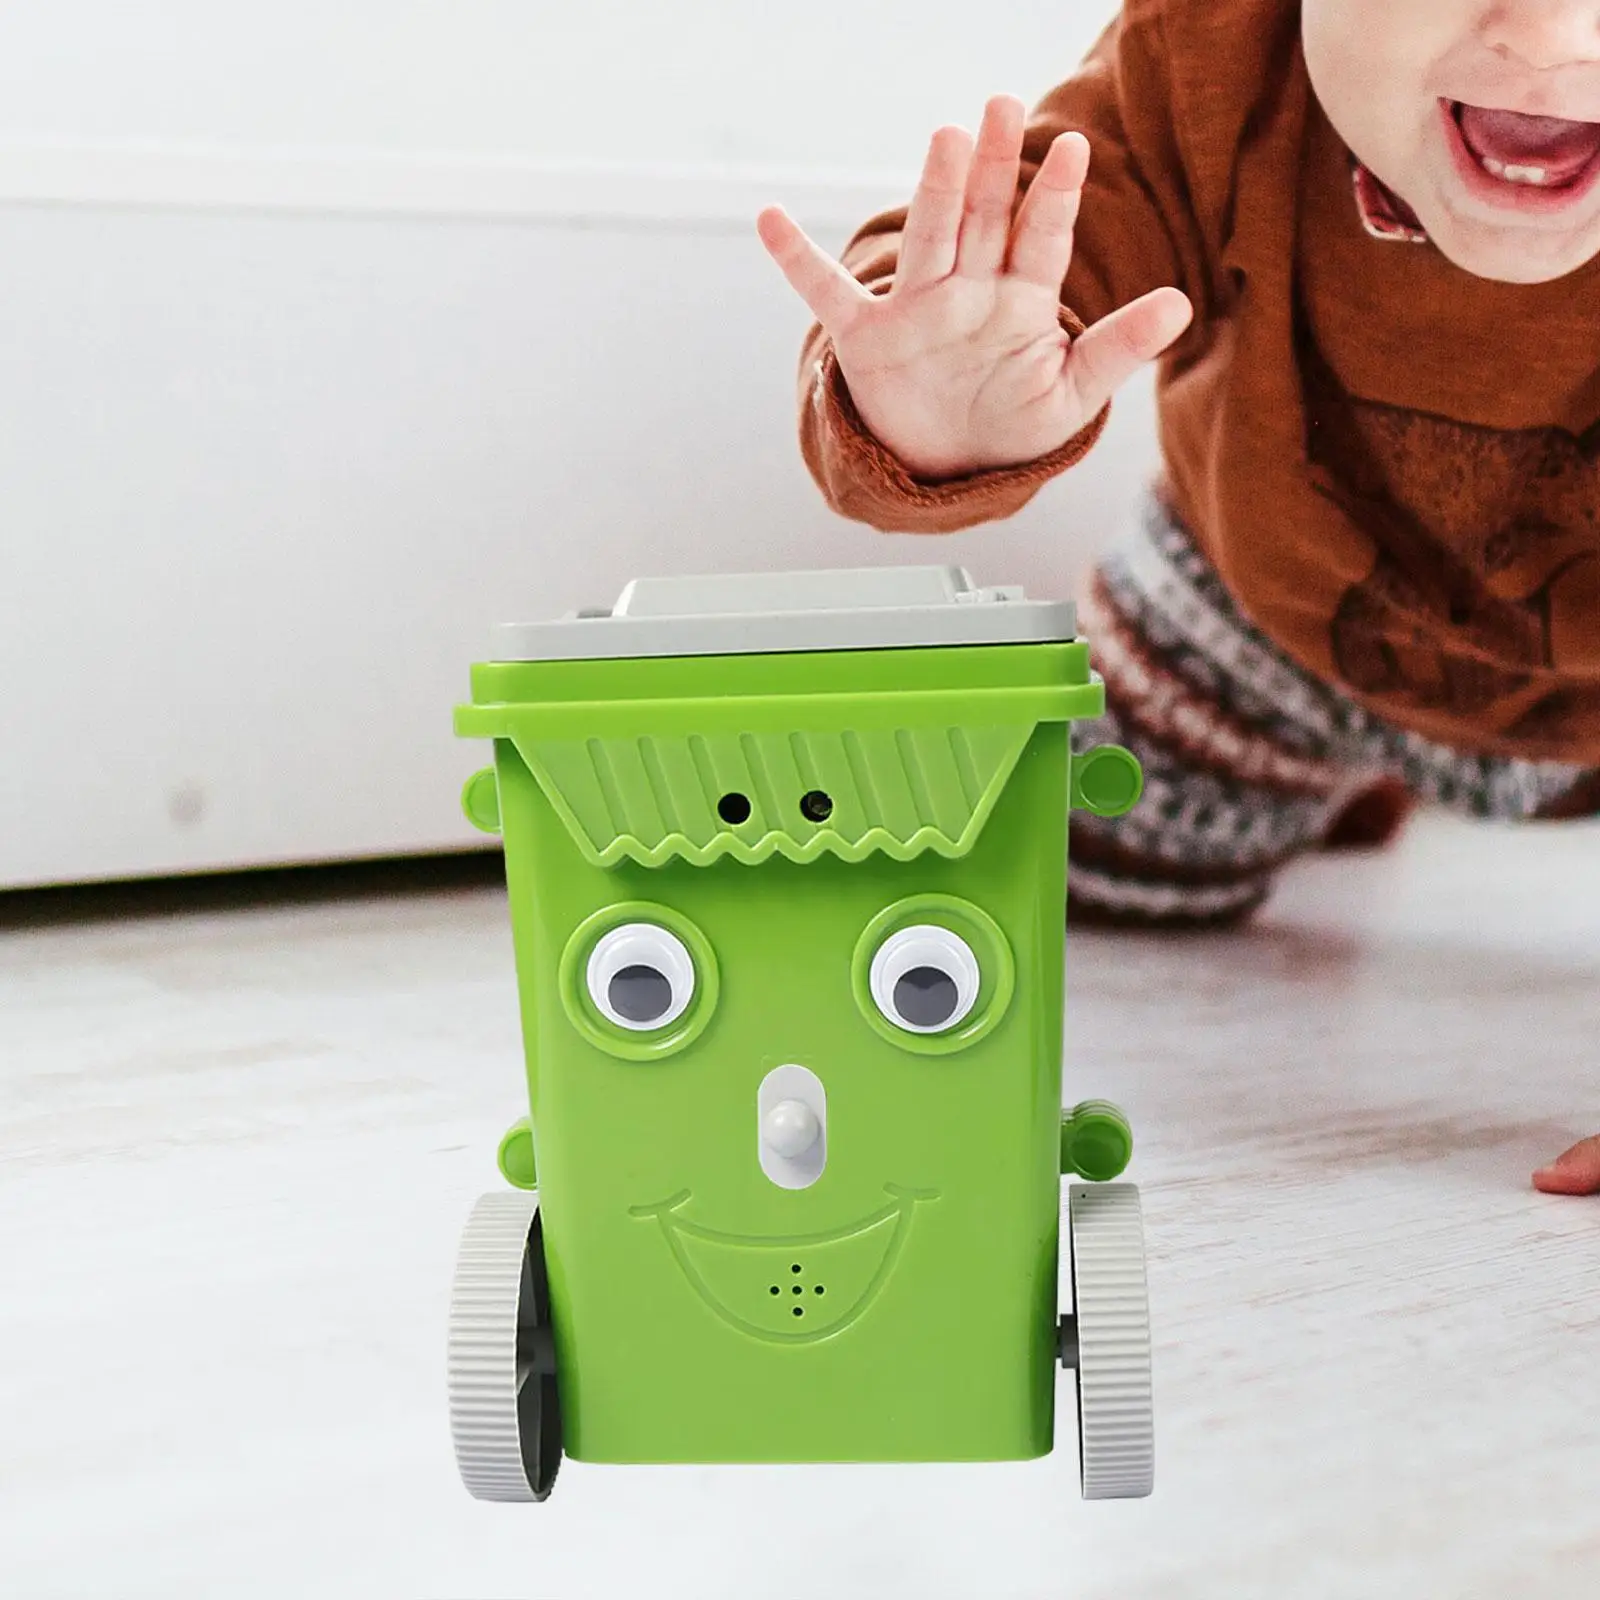 Vacuum Cleaner Toy Mini Curbside Vehicle Garbage Bin Model for Festivals